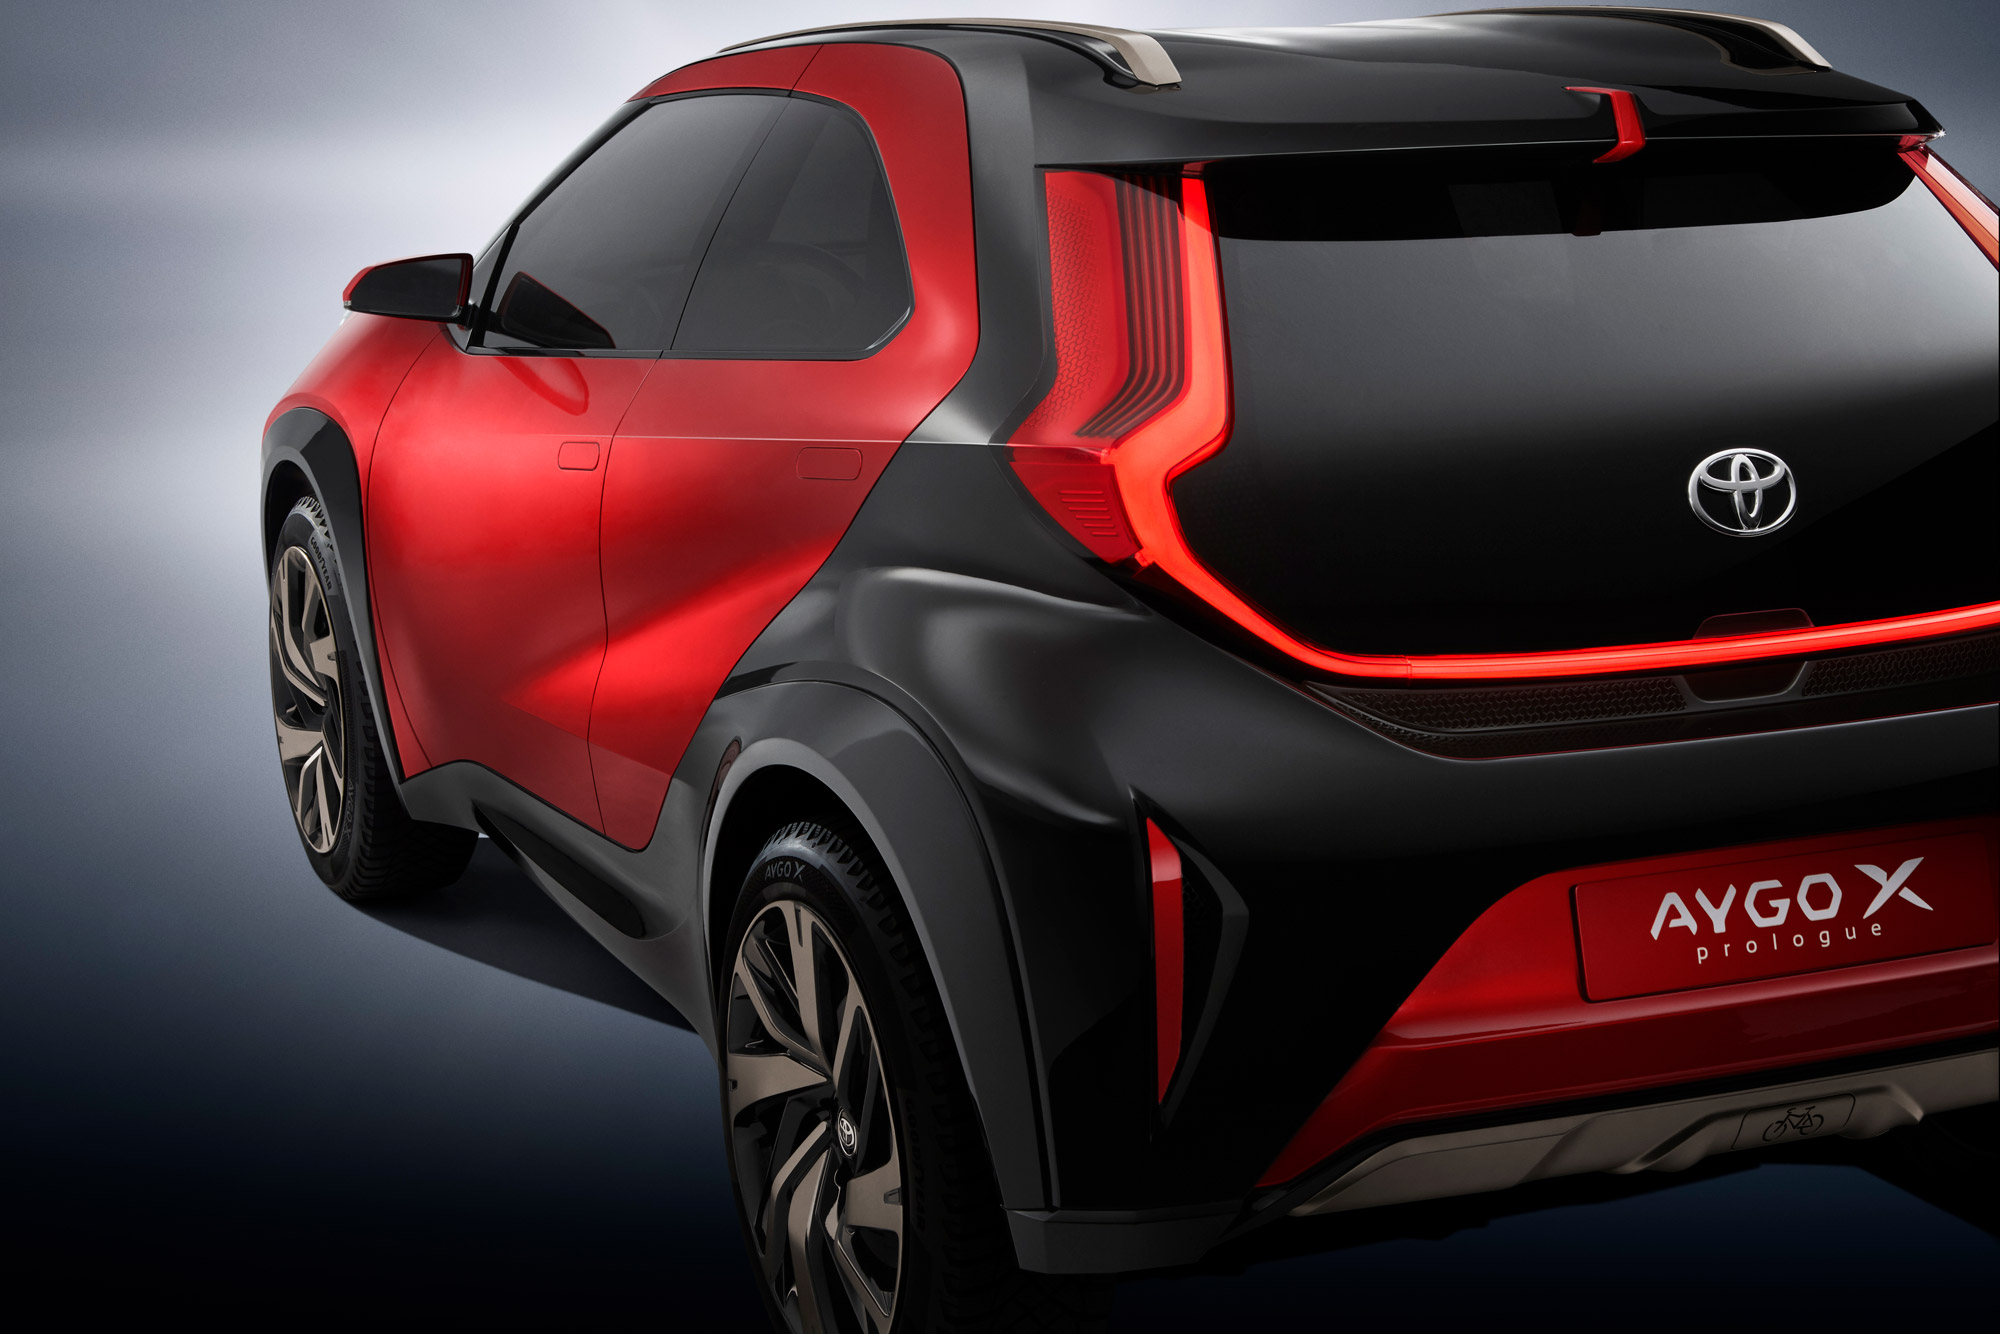 We Are Sorry To Report That The Toyota Aygo X Prologue Looks Amazing